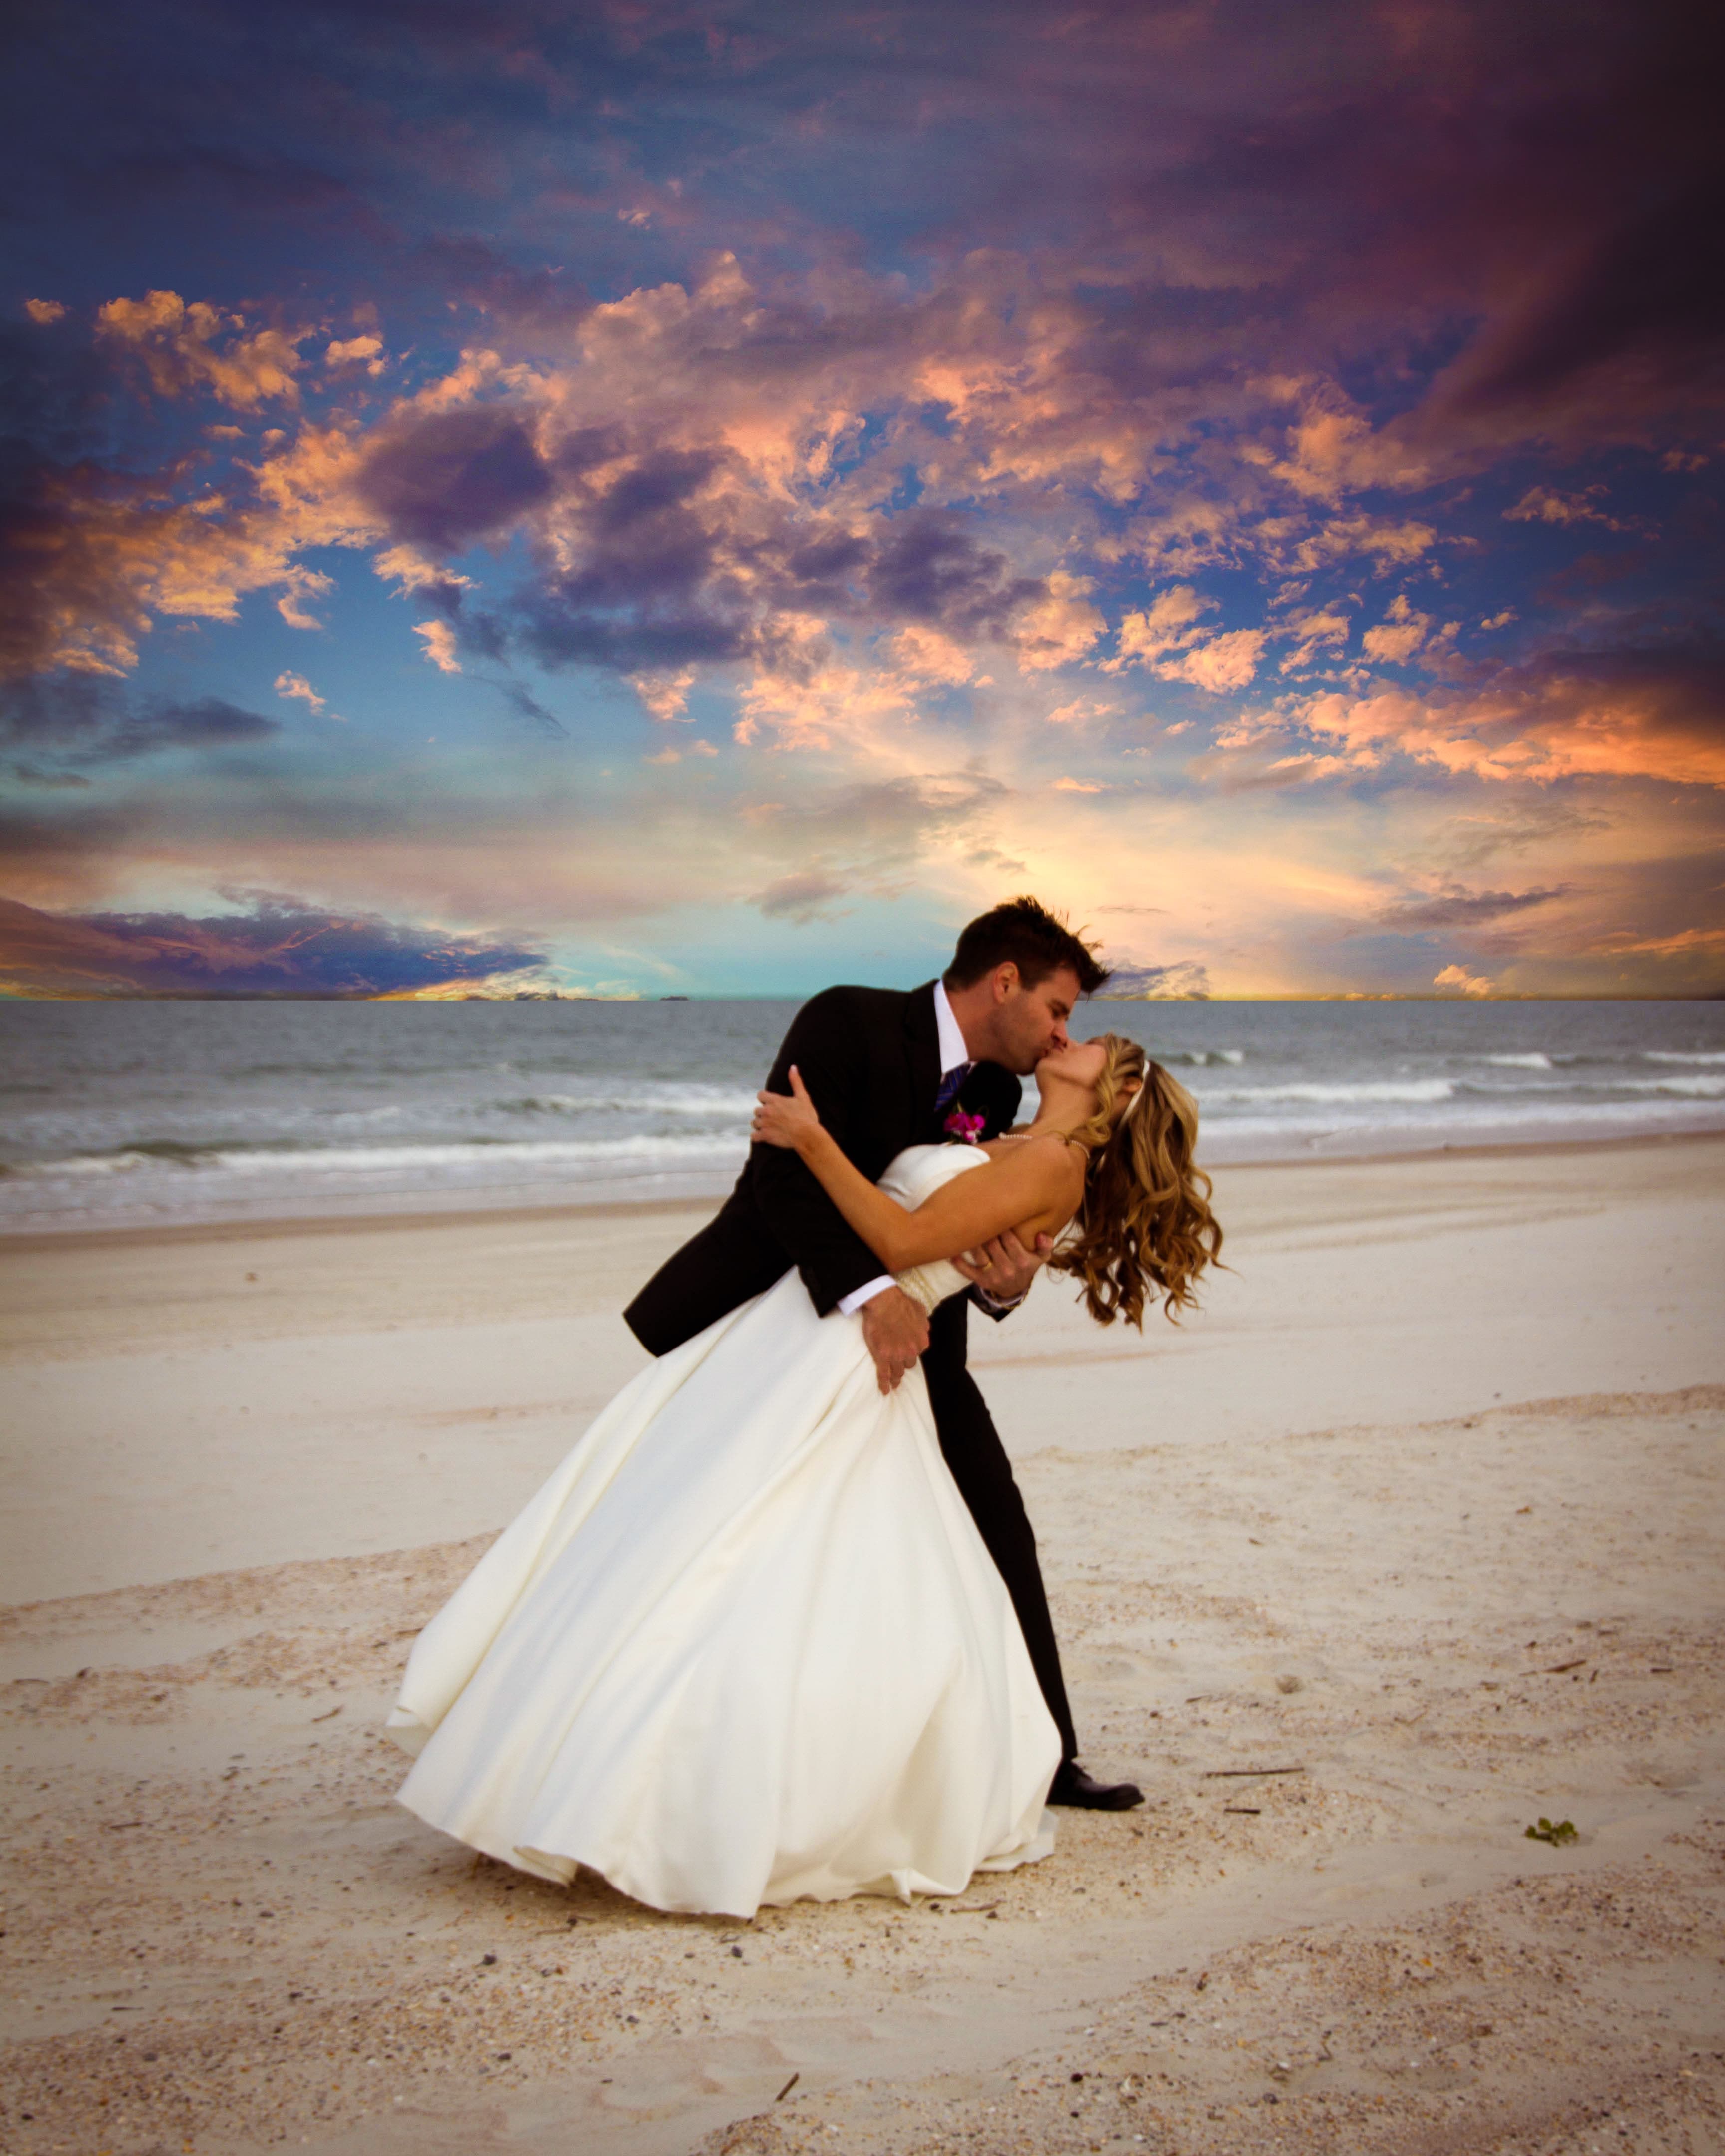 Northwest Florida's Premier Wedding Photographer, serving all of NW FL and Travel!